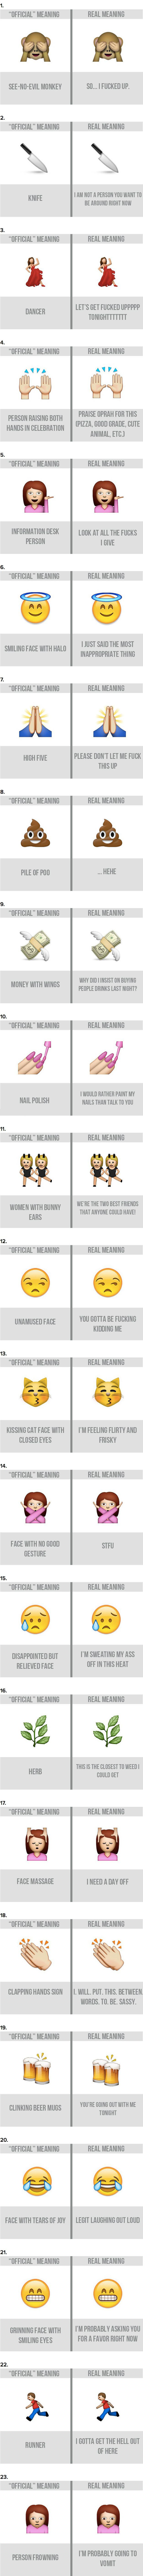 23 emoticons explained by their official meaning and their real meaning